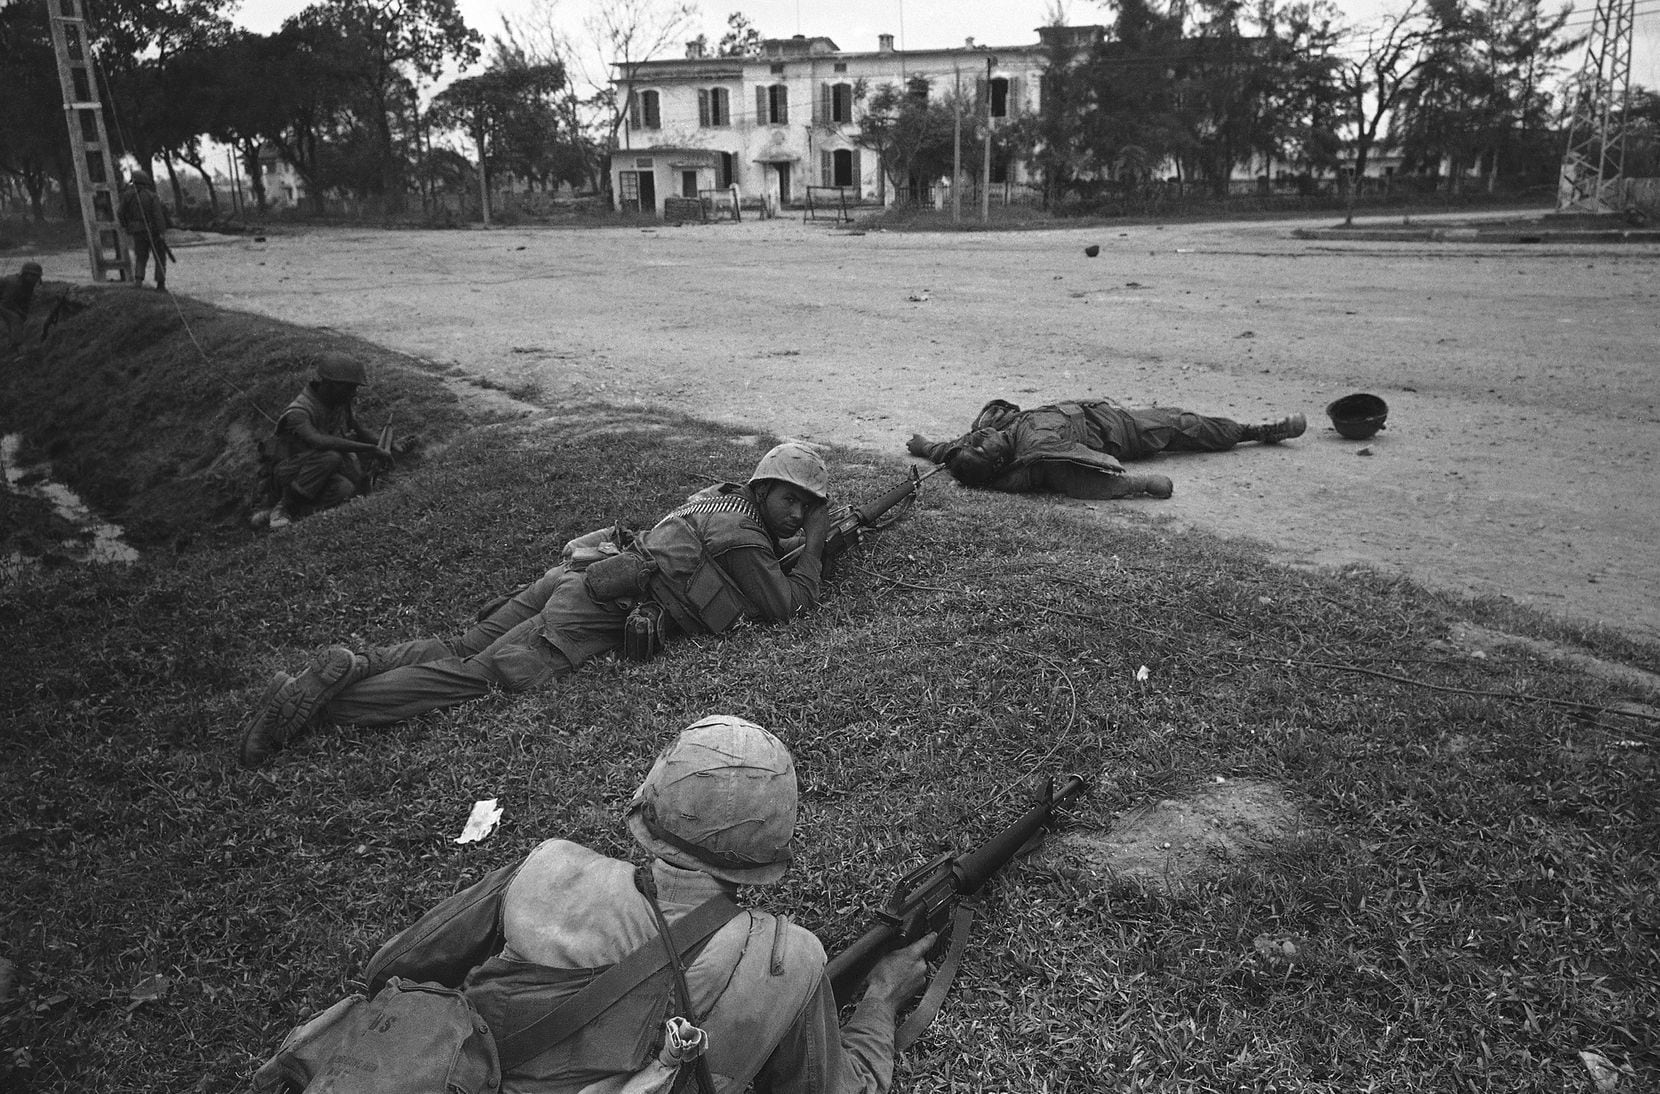 The U.S. Marines take up firing positions on the side of the road in downtown Hue, Vietnam...